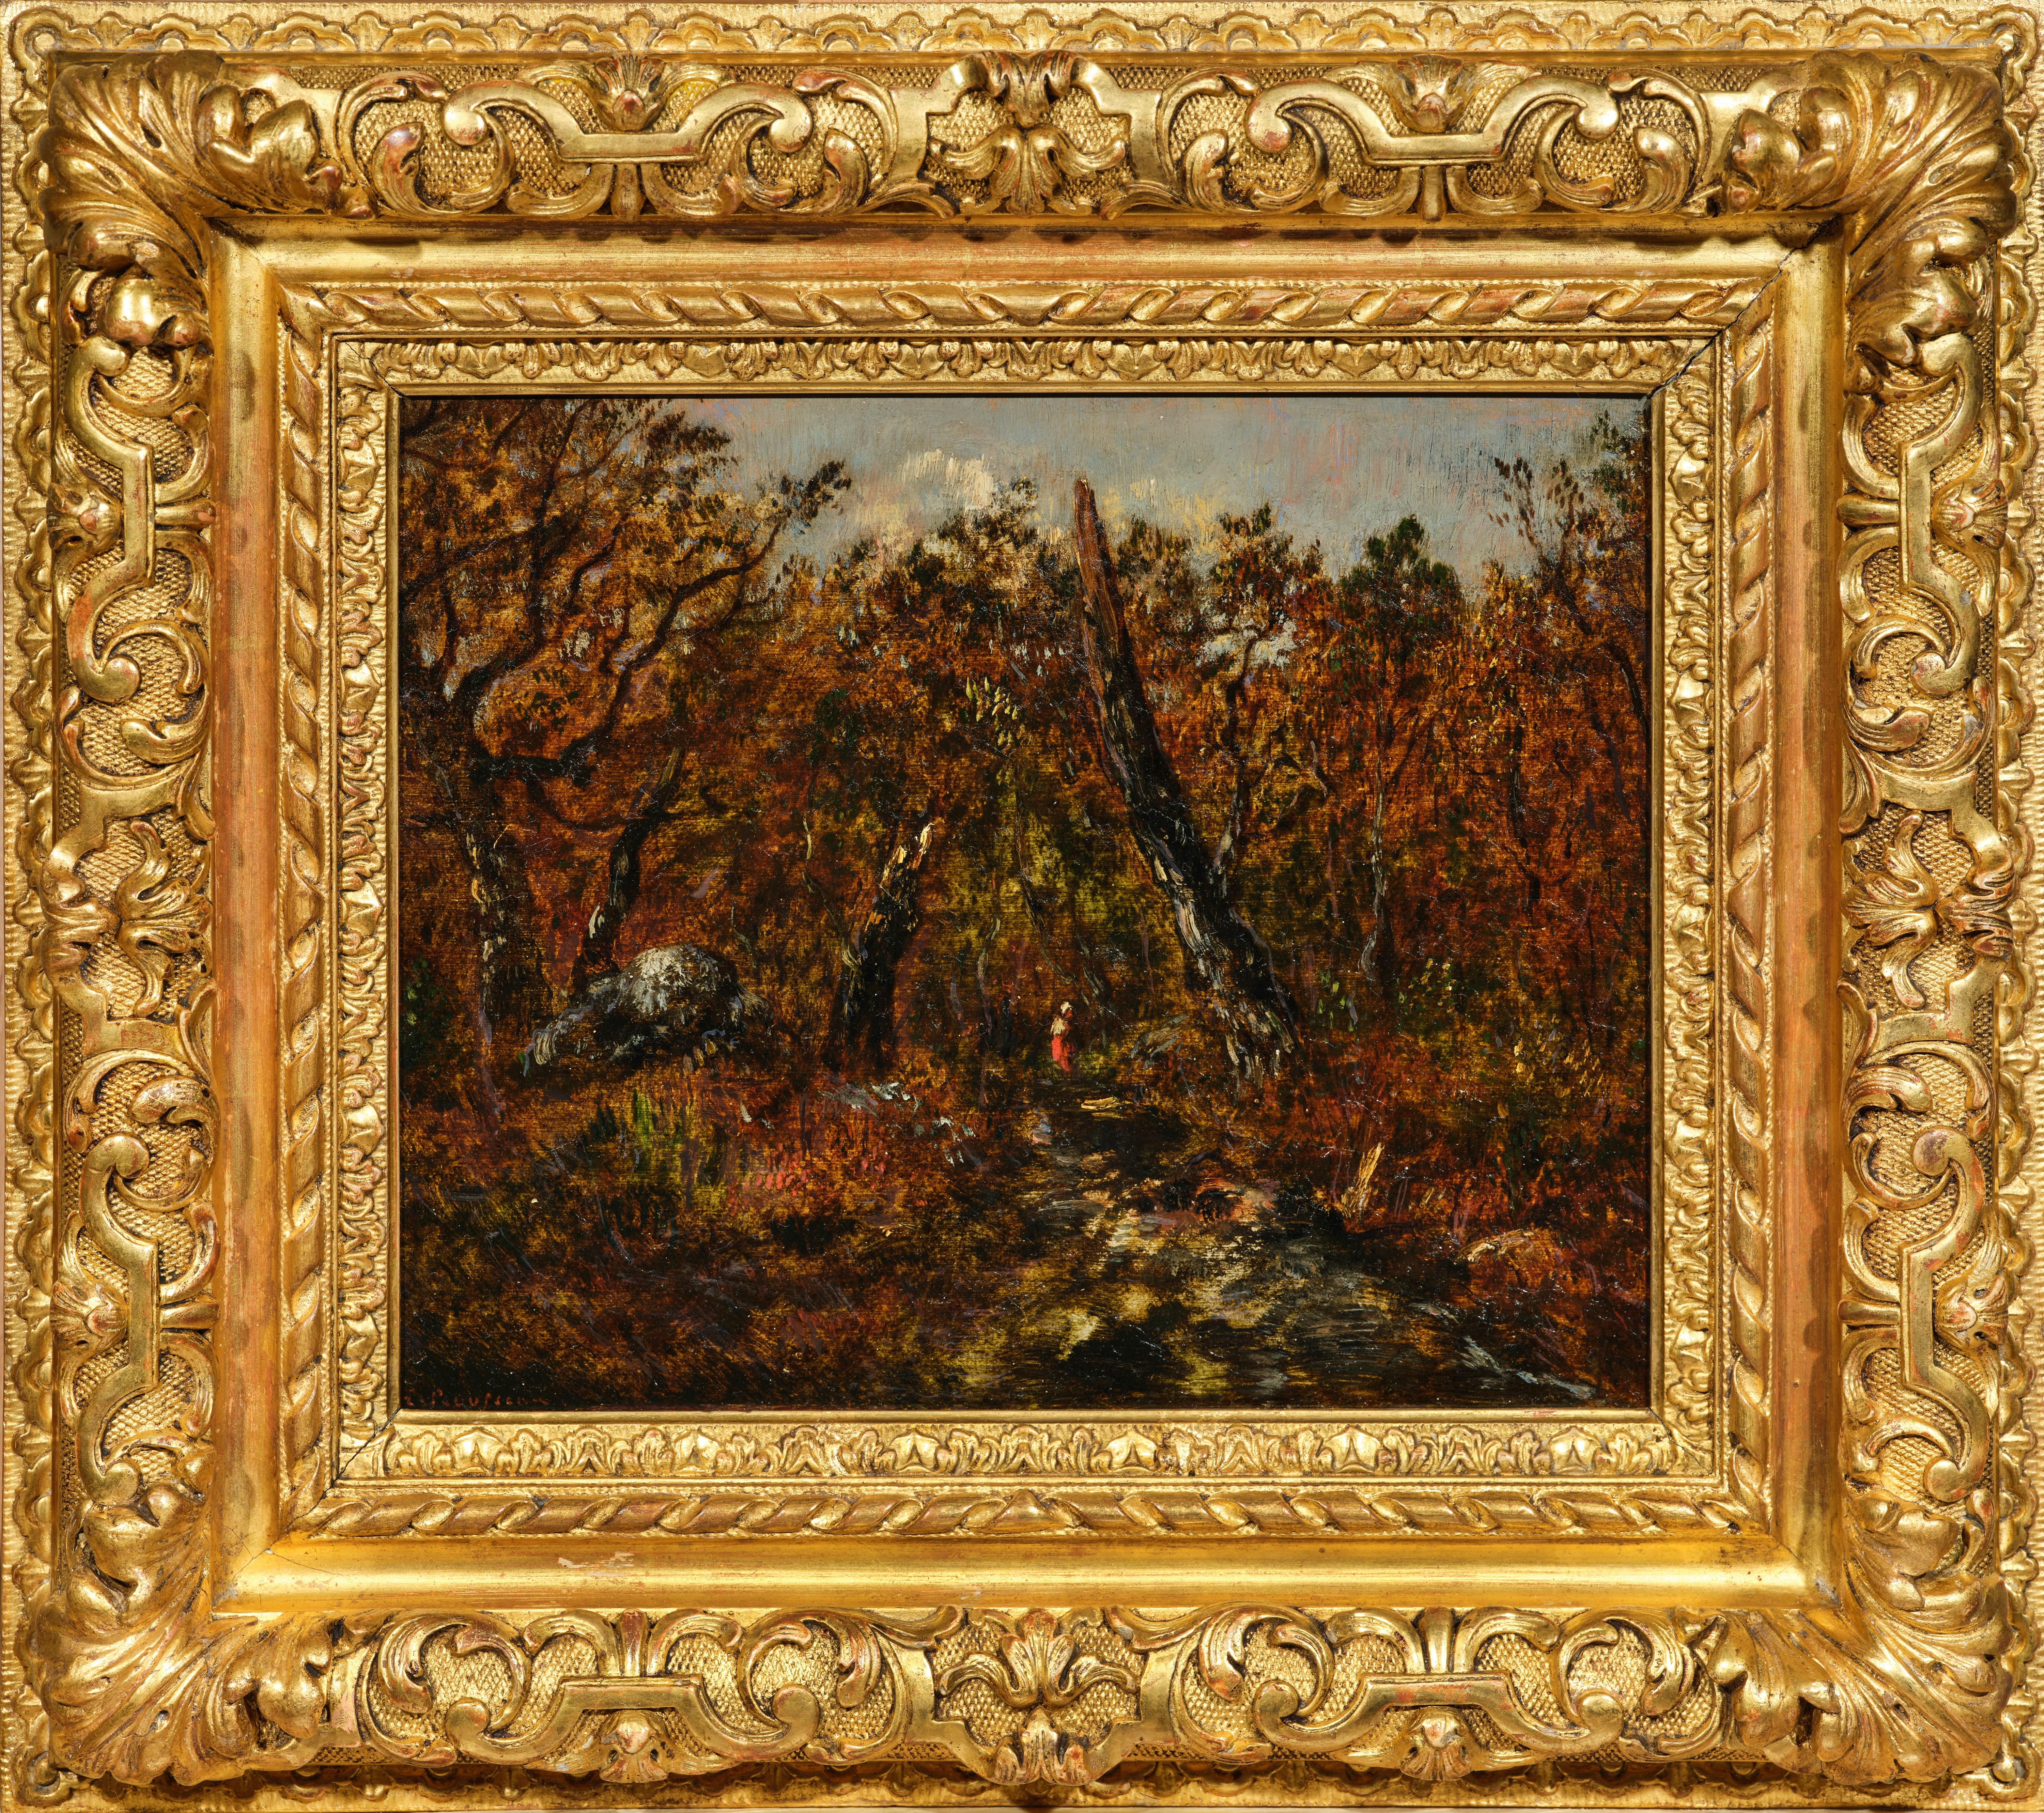 Sunset, an emblematic painting by Théodore Rousseau inspired by Barbizon 